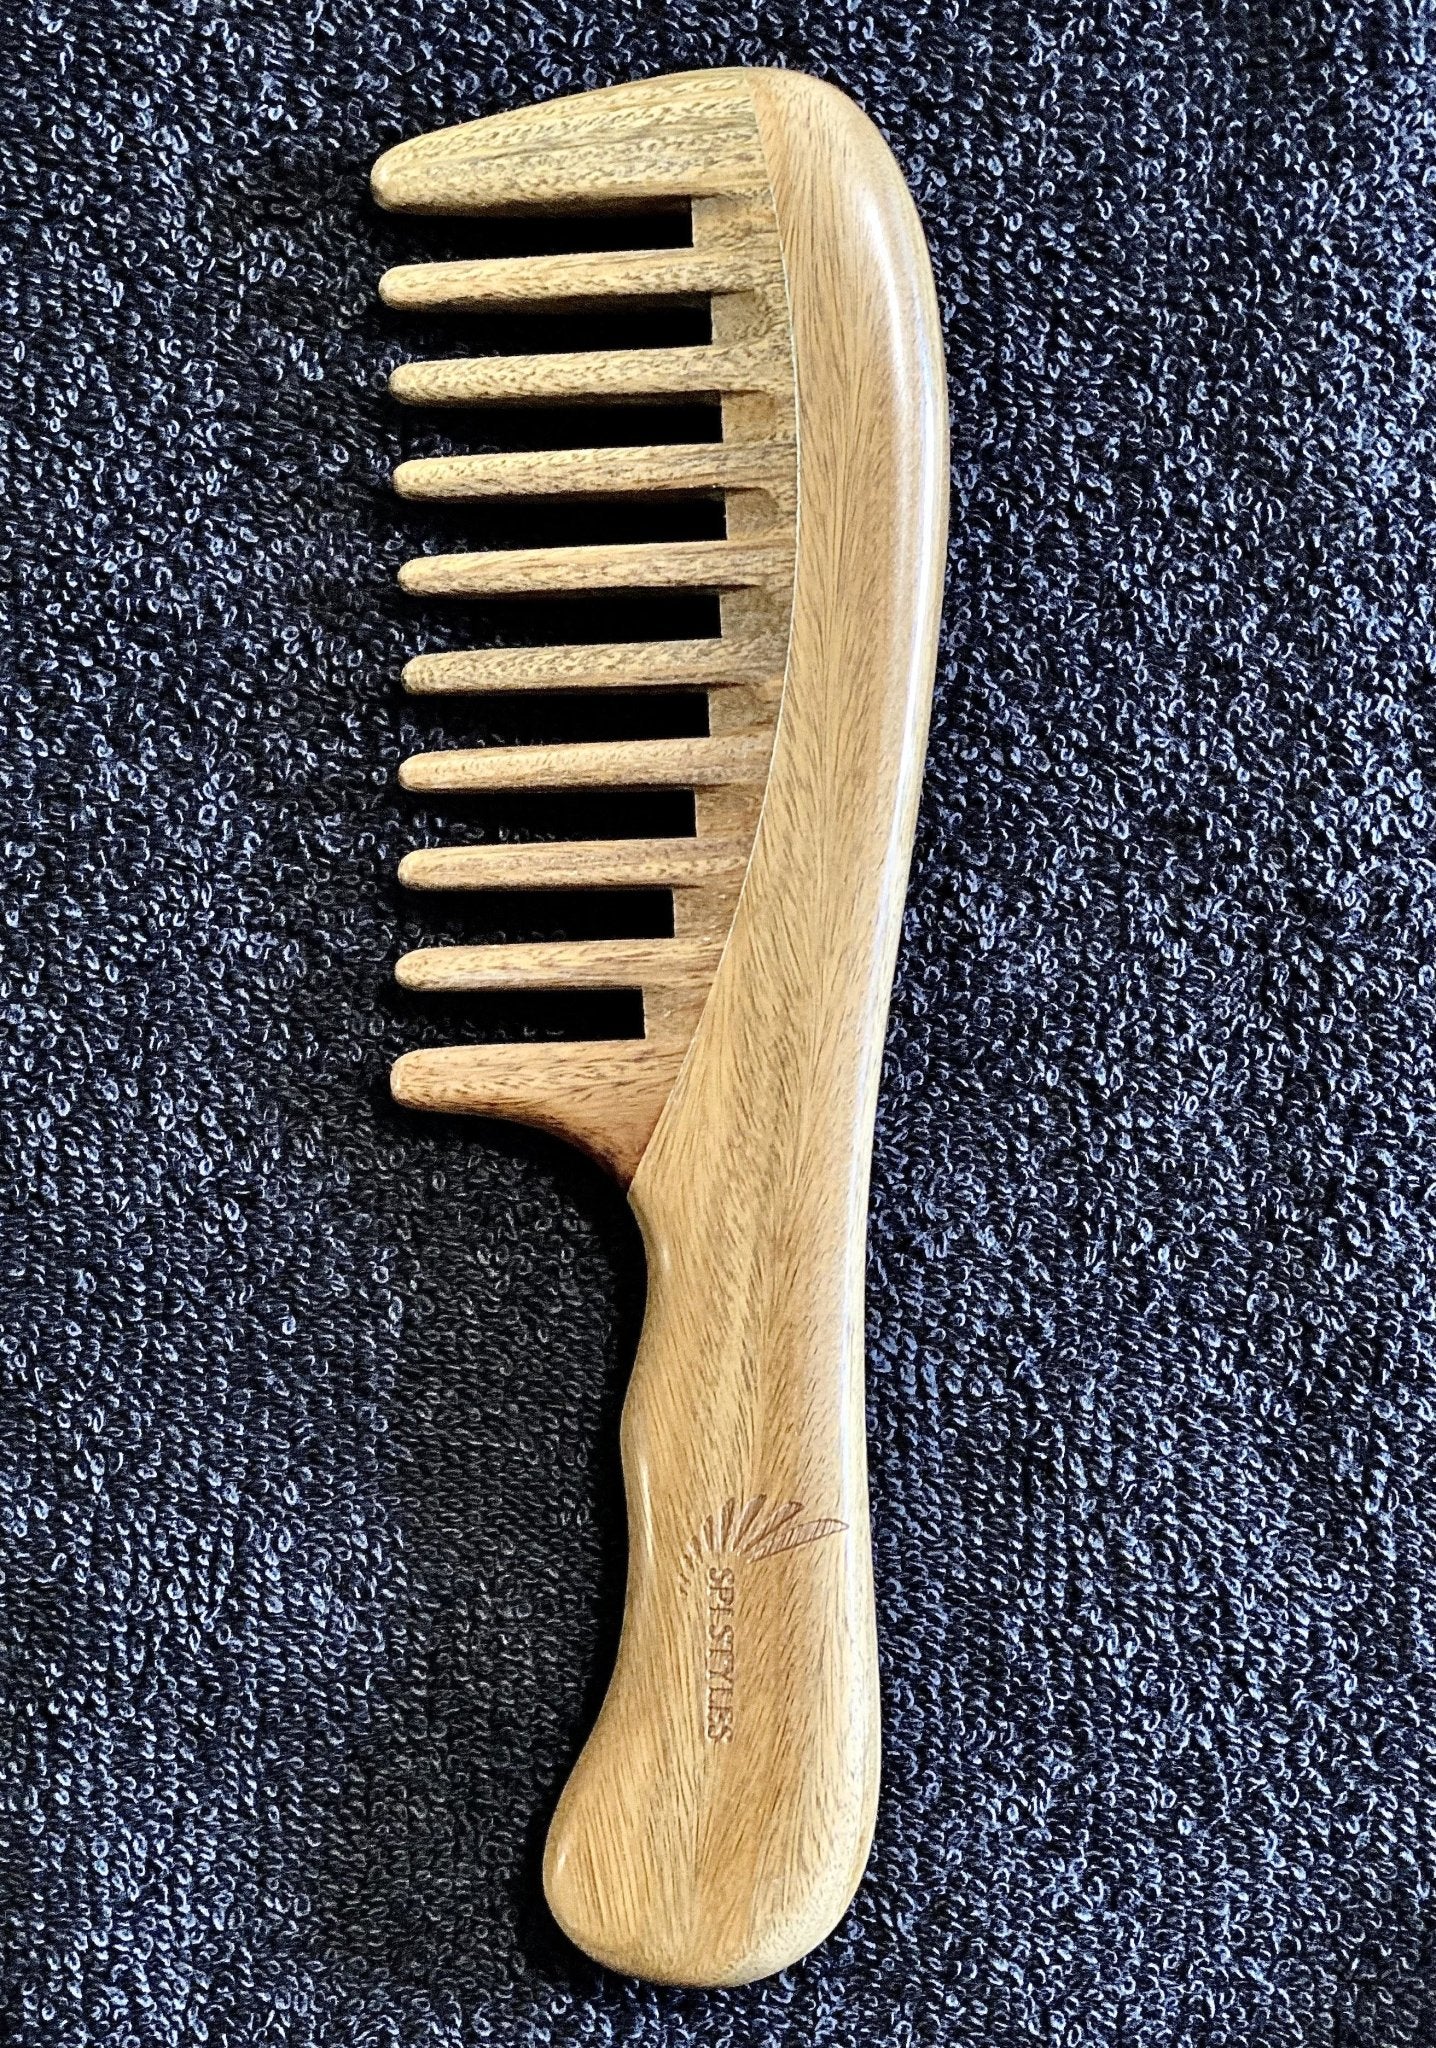 sandalwood hair comb, detangling wooden comb, wide tooth hair brush, best wooden comb for curly hair, sandalwood hair brush, best wood comb for curly hair, fine tooth wooden comb, amazon hair products for curly hair